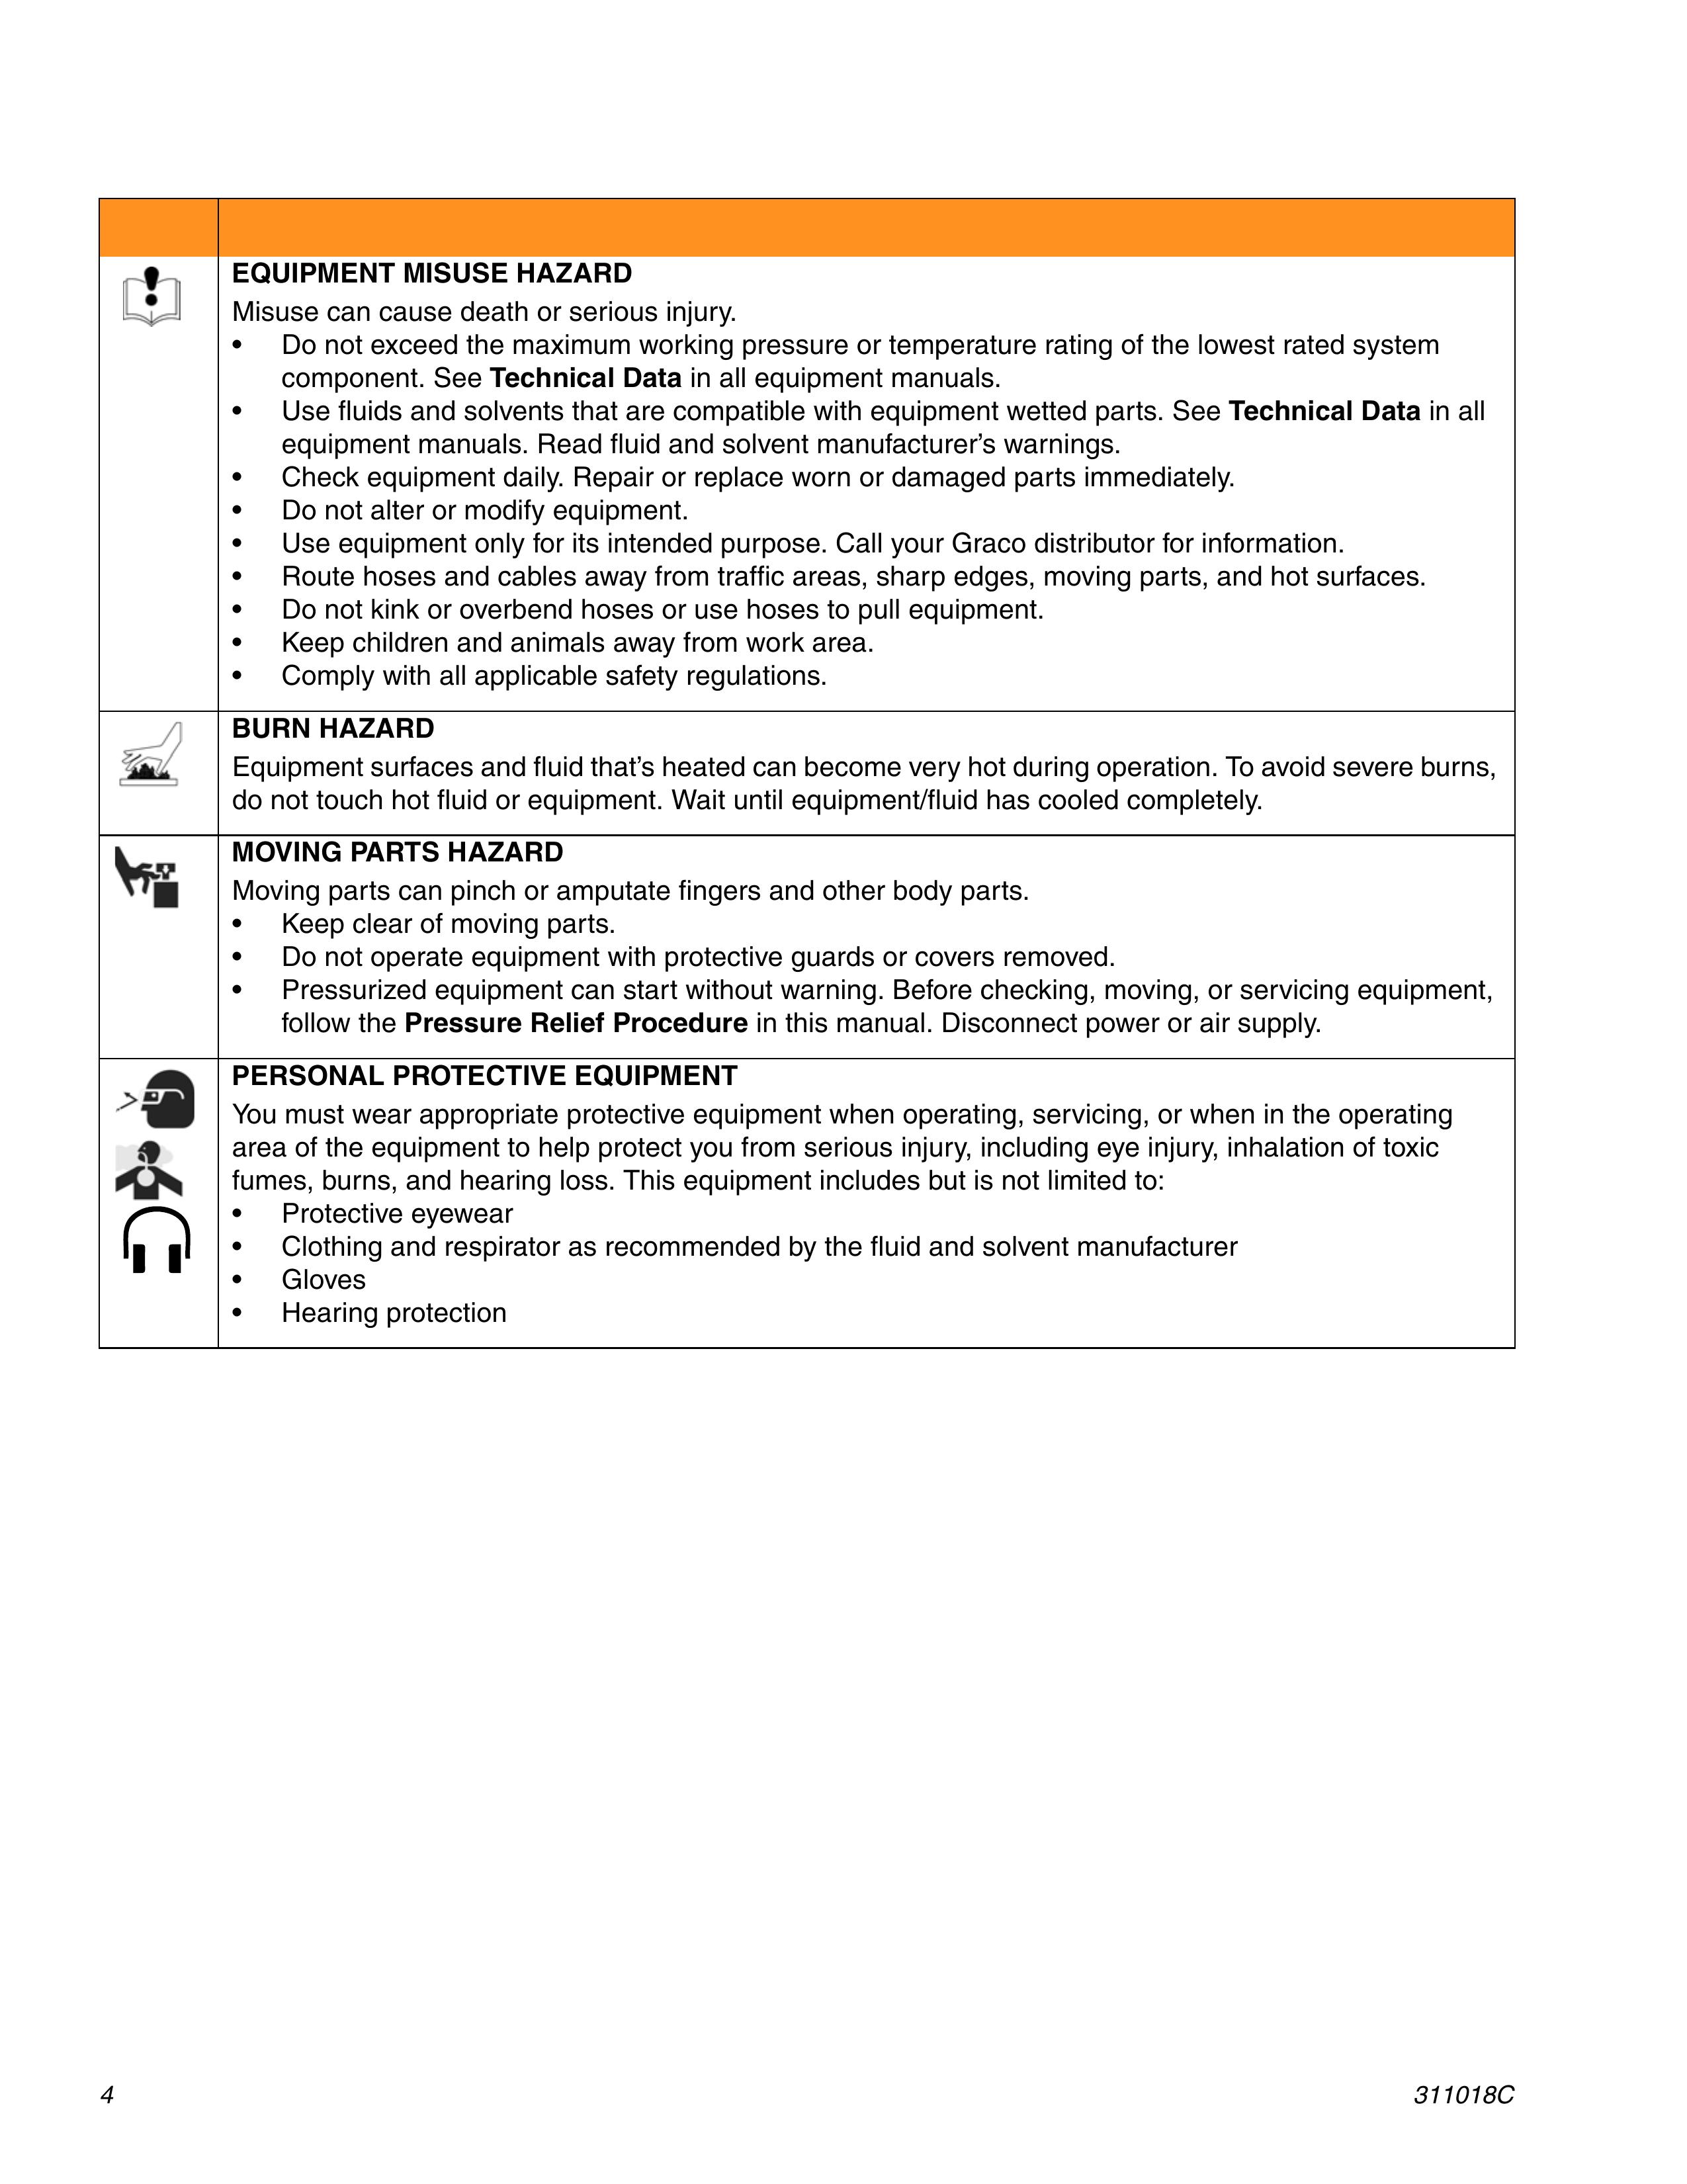 Graco 248870 Blood Glucose Meter User Manual (Page 4)